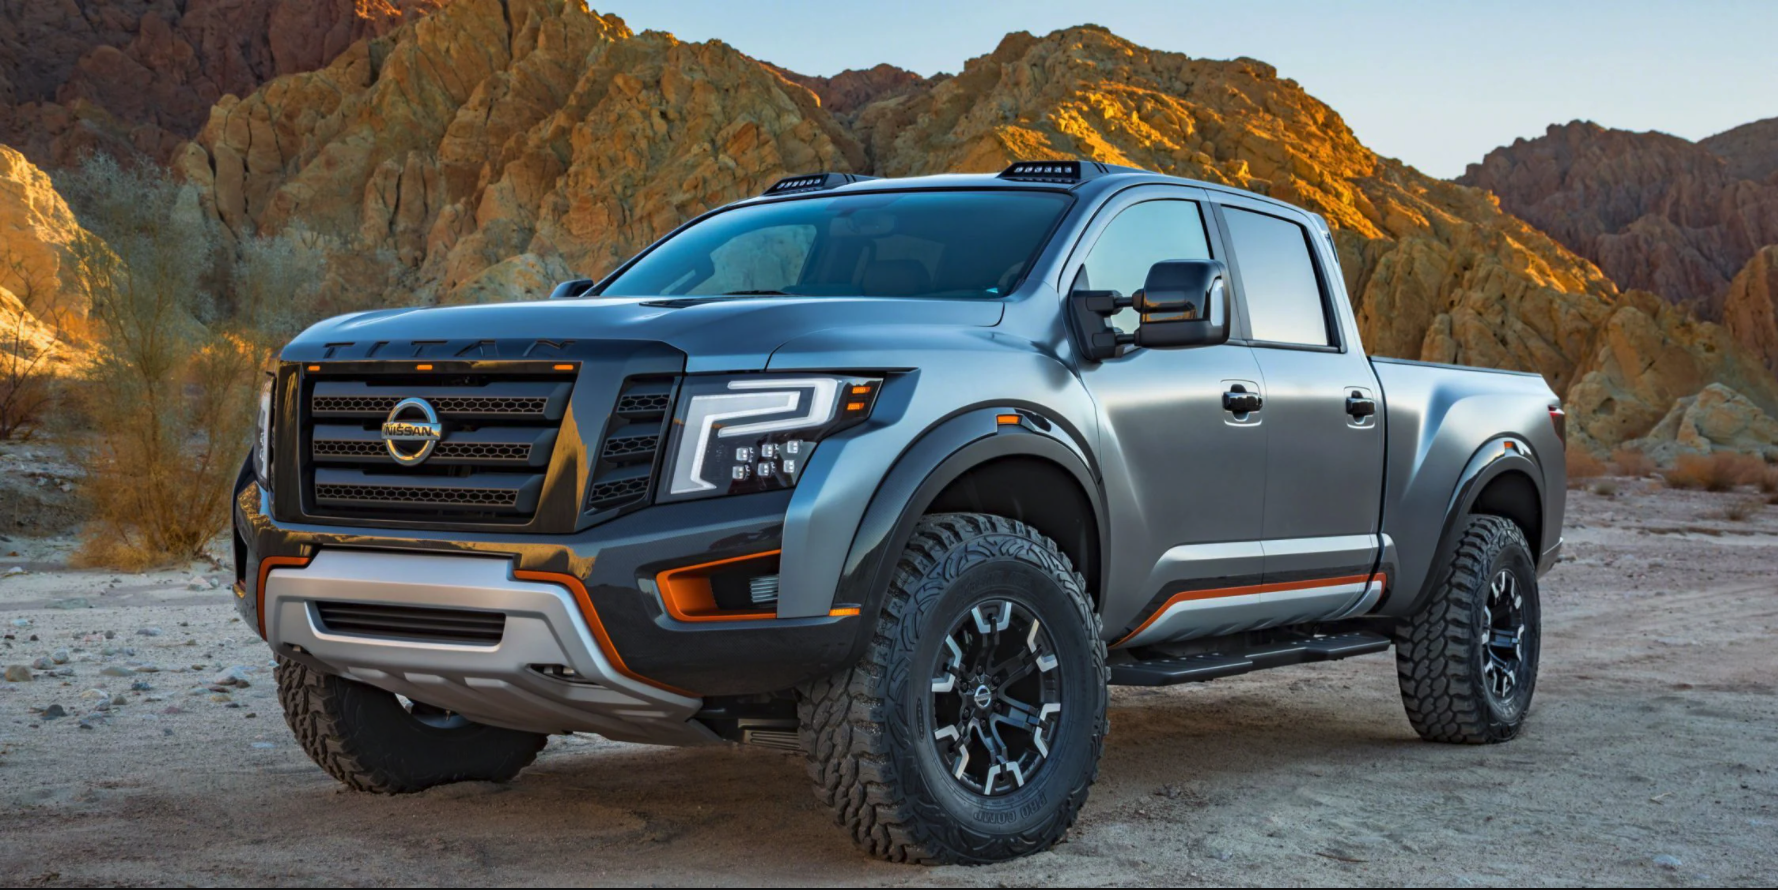 The 2021 Nissan Titan Warrior Is Coming to Battle